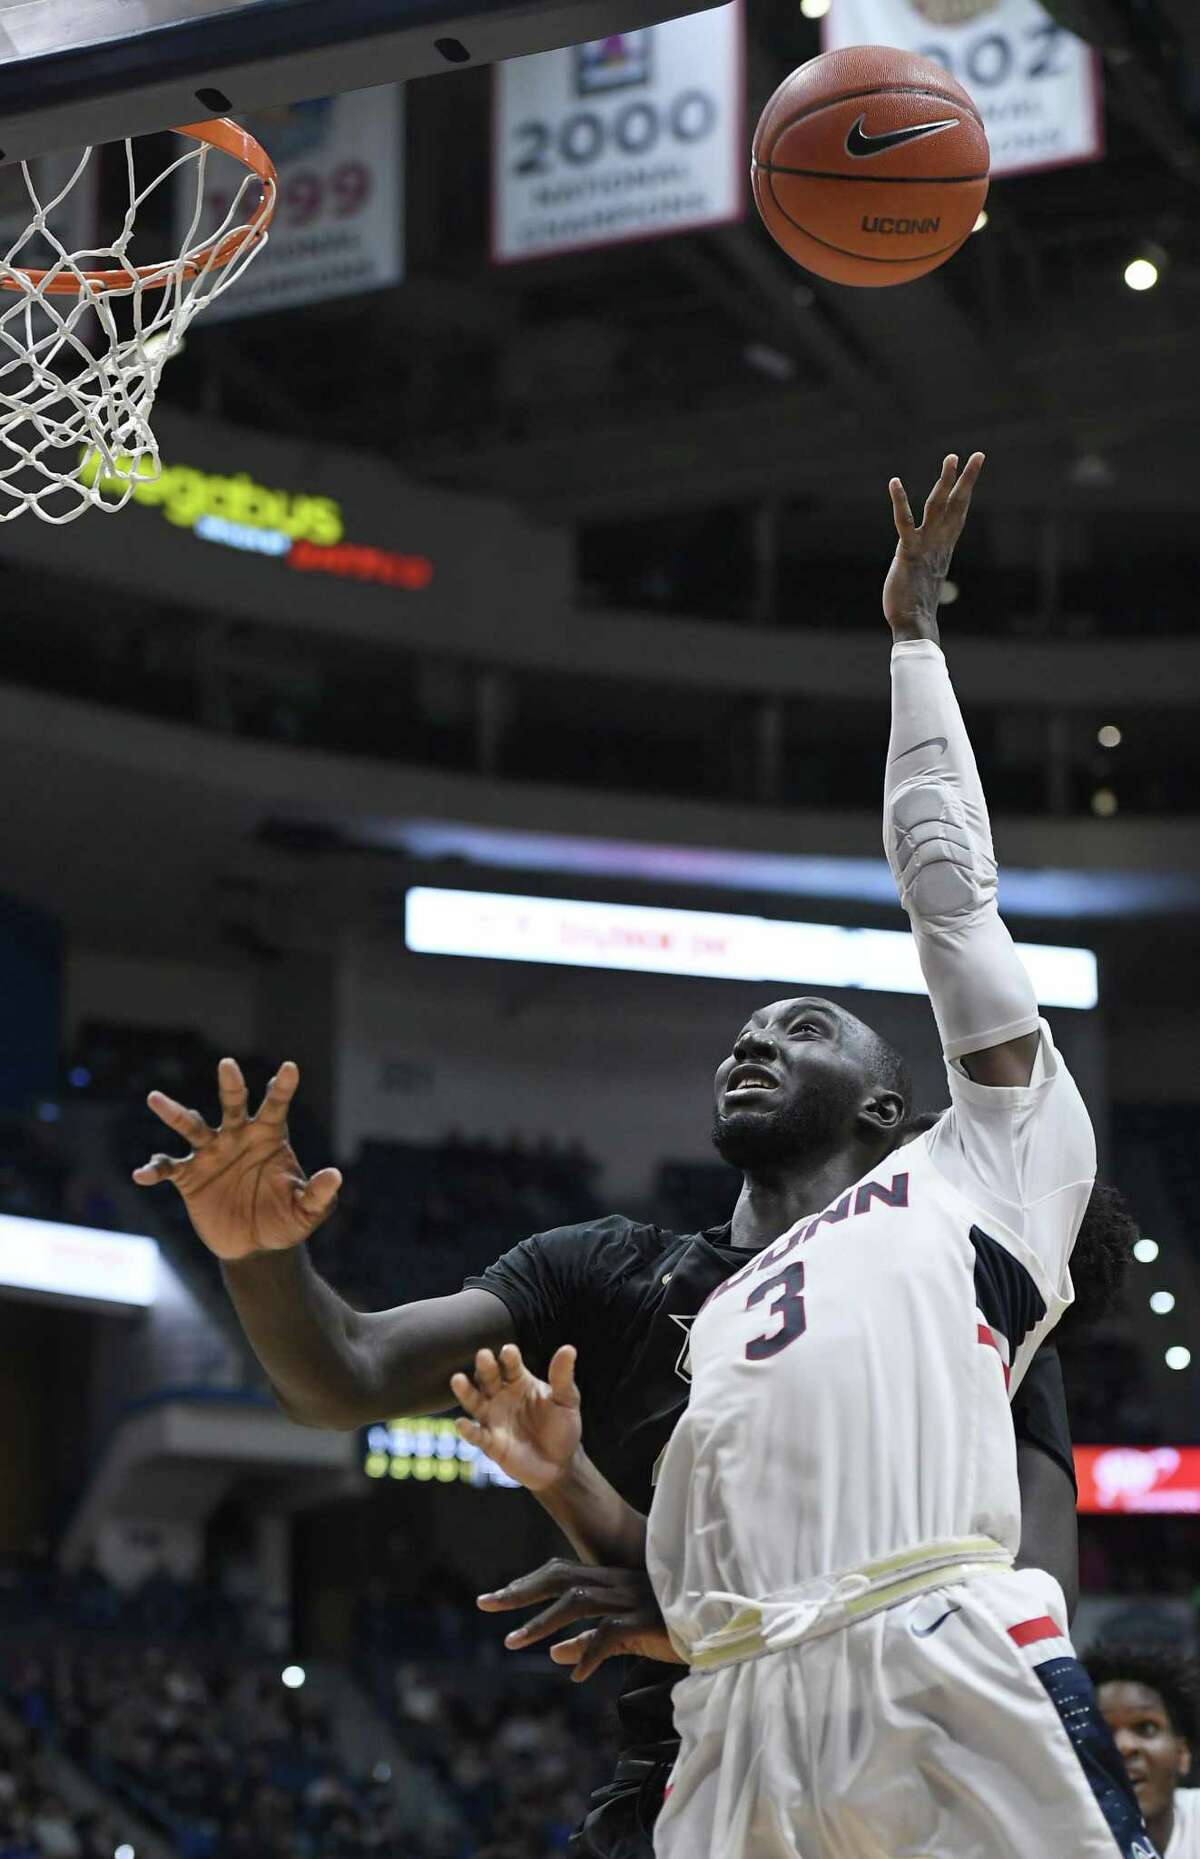 UConn’s Alterique Gilbert, right, goes up for a basket as UCF’s Tacko Fall defends during the second half on Saturday.